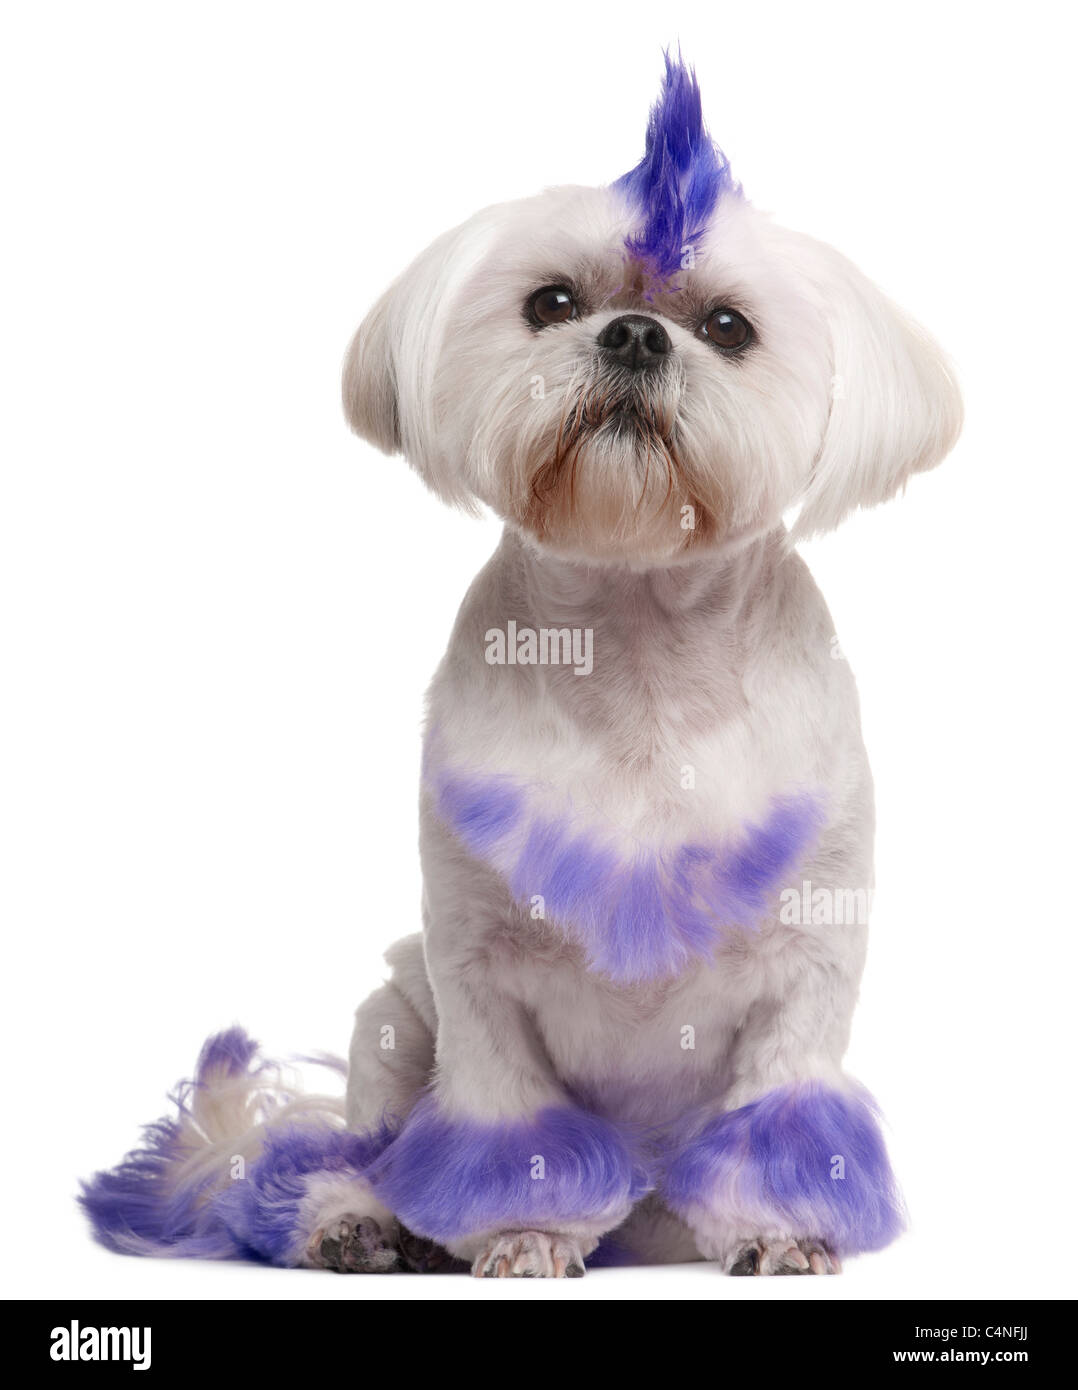 Shih Tzu with purple mohawk, 2 years old, sitting in front of white background Stock Photo